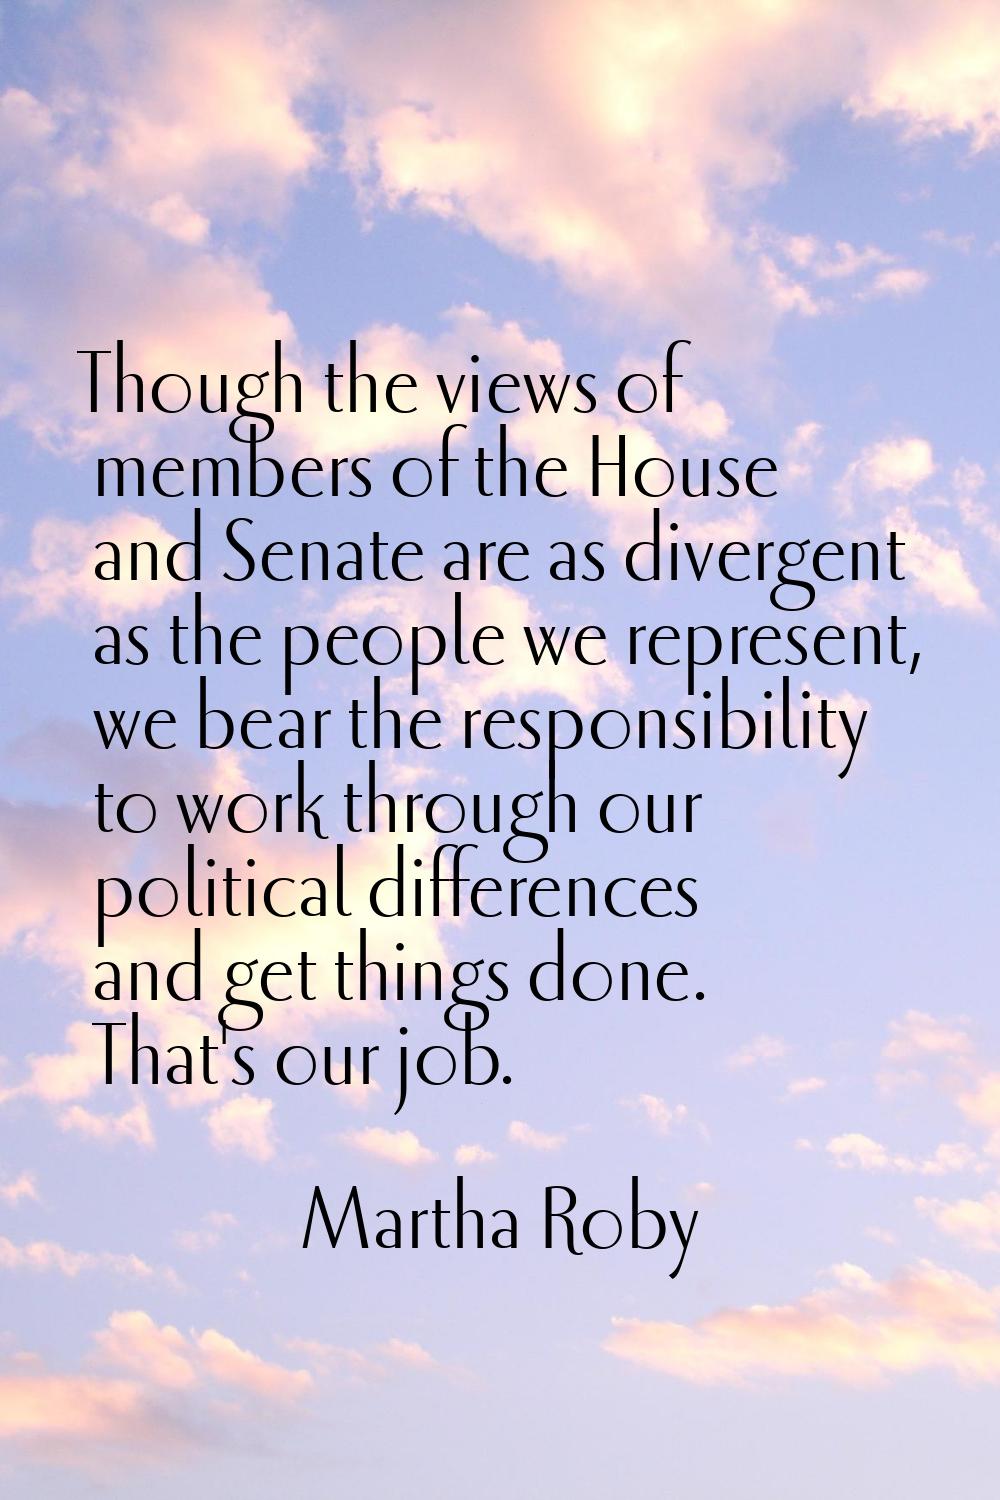 Though the views of members of the House and Senate are as divergent as the people we represent, we